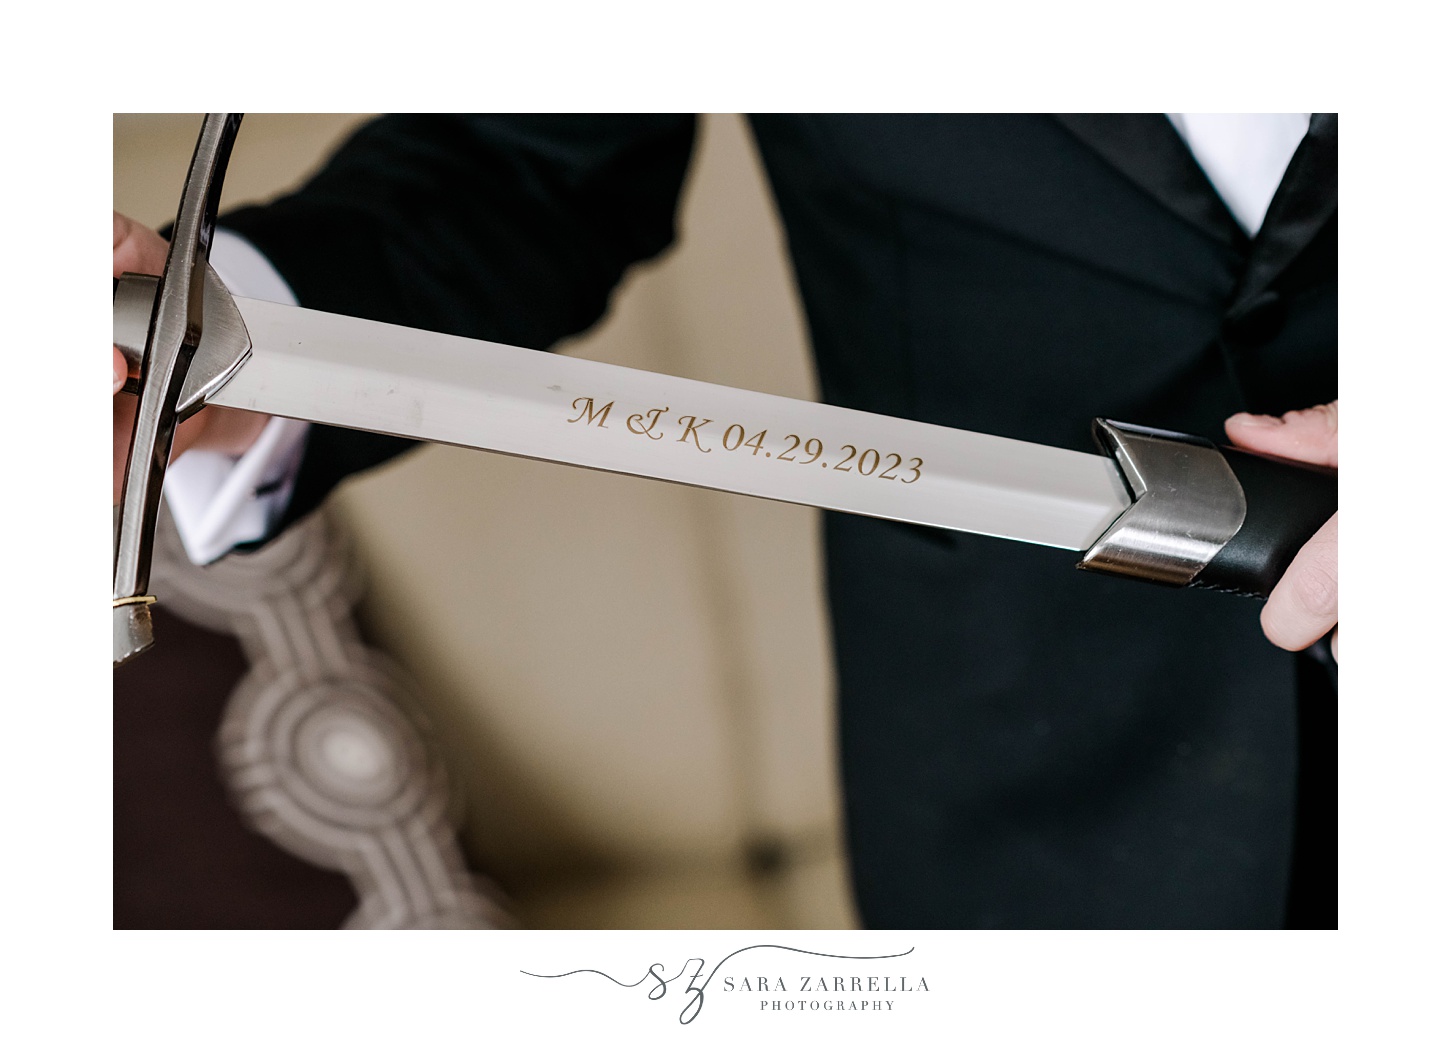 groom pulls saber out of case showing off engraving 